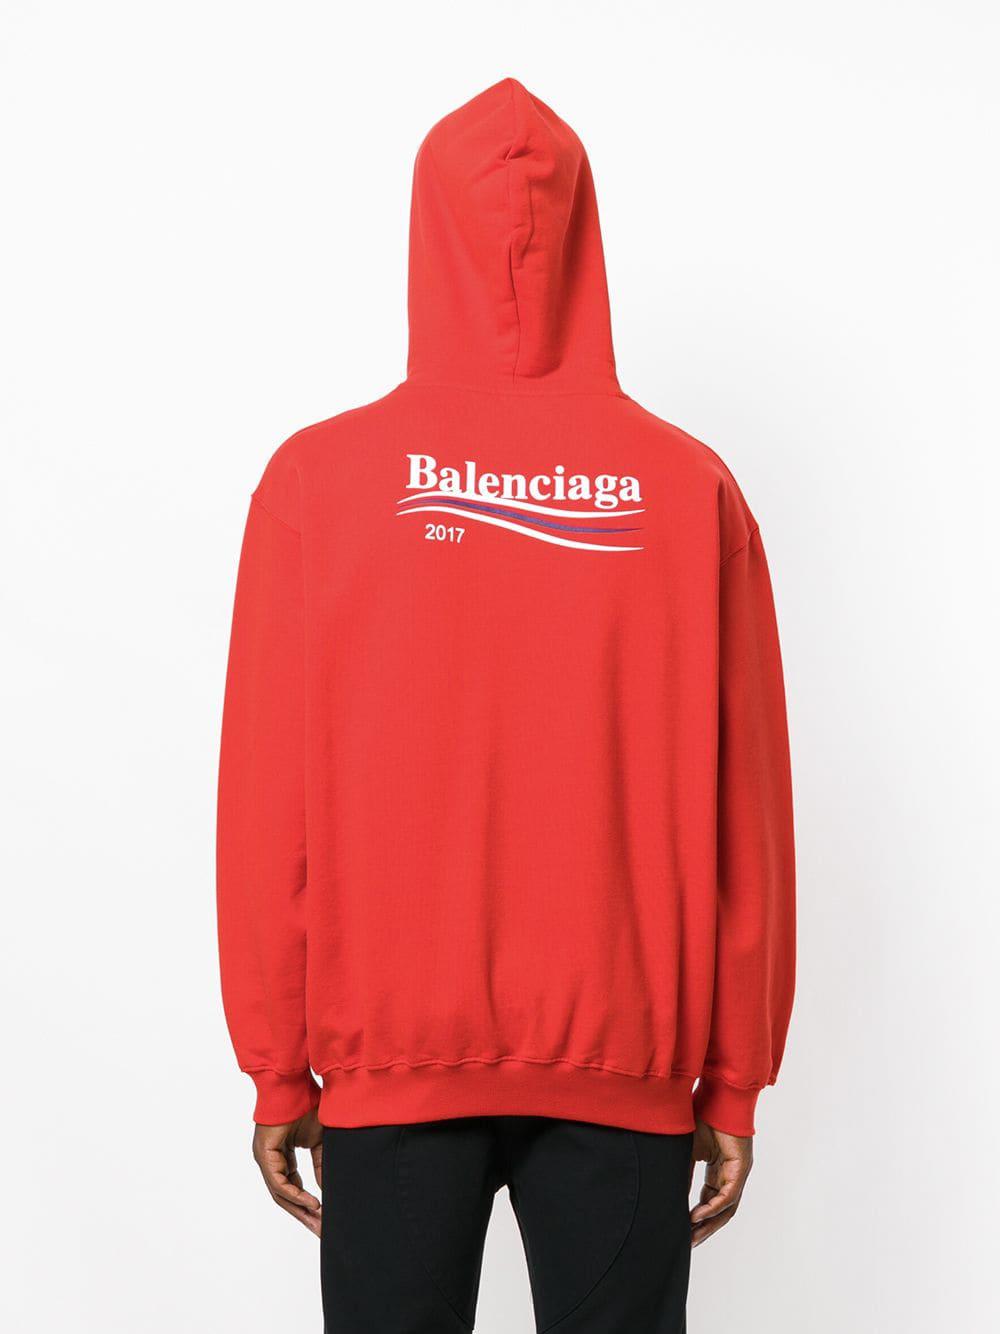 Balenciaga Cotton 2017 Hoodie in Red for Men - Lyst